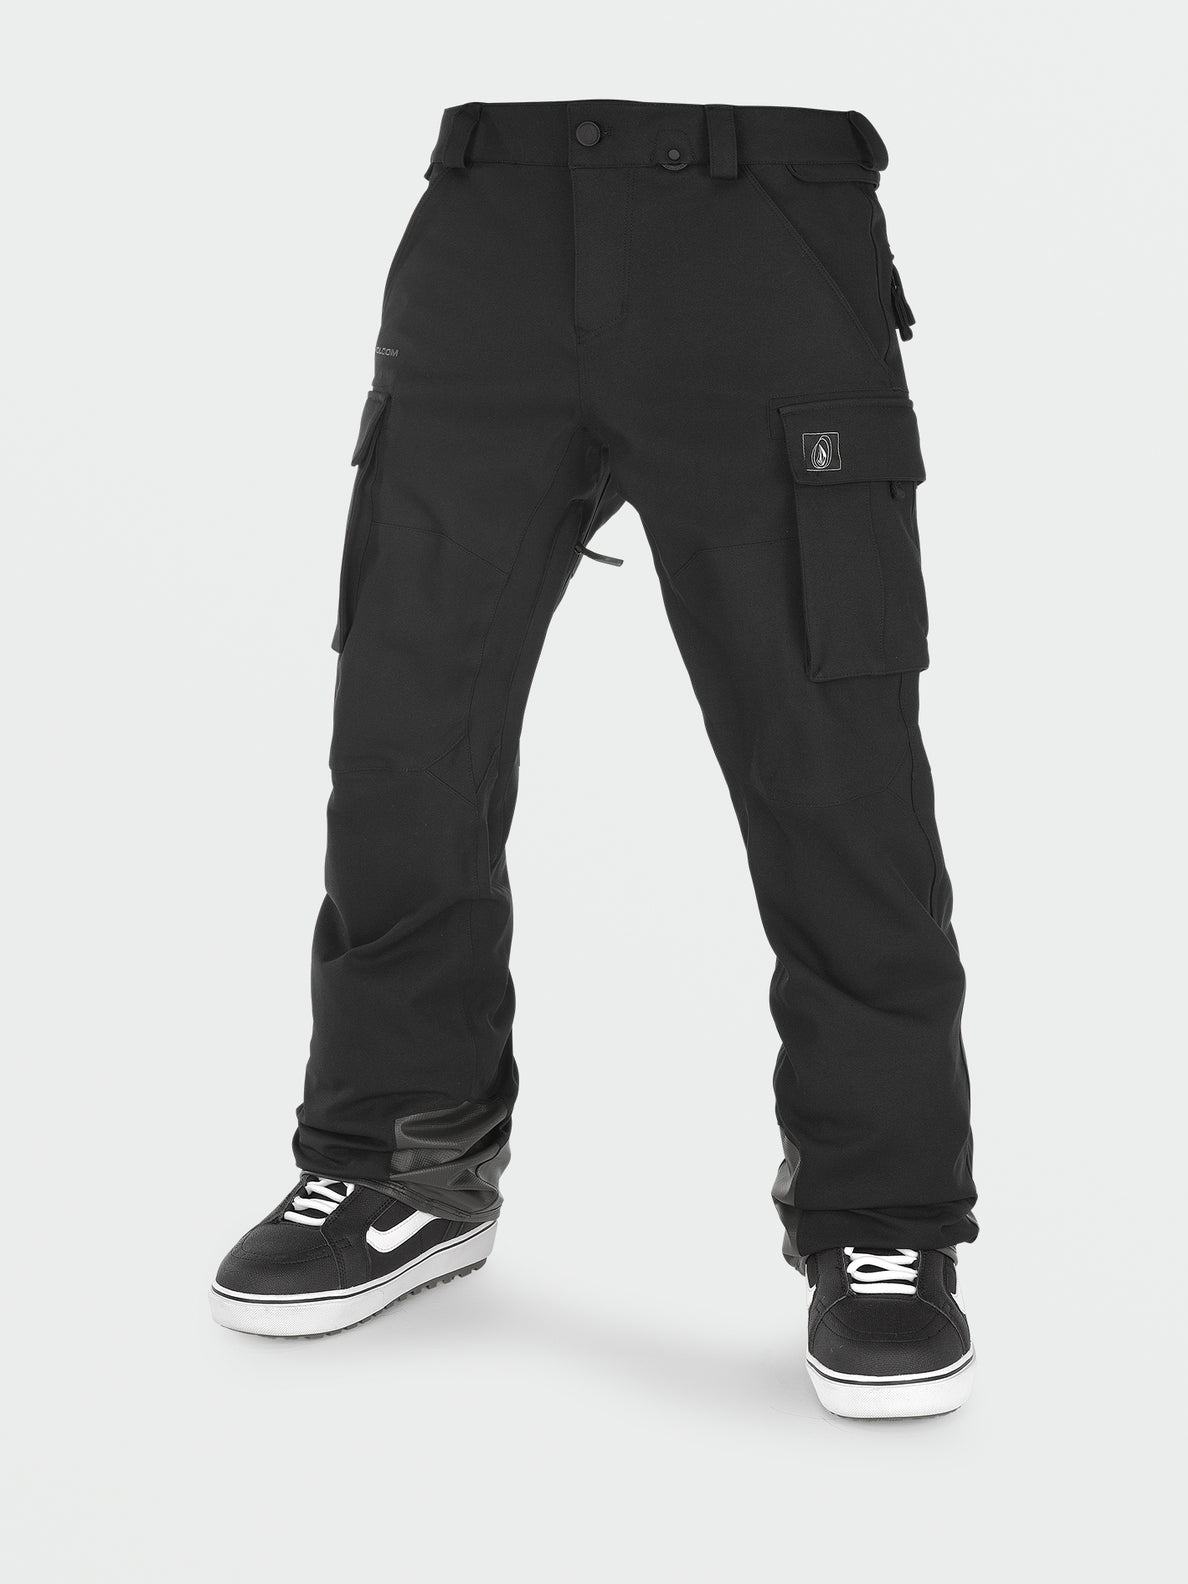 Mens New Articulated Pants - Black (G1352305_BLK) [1]